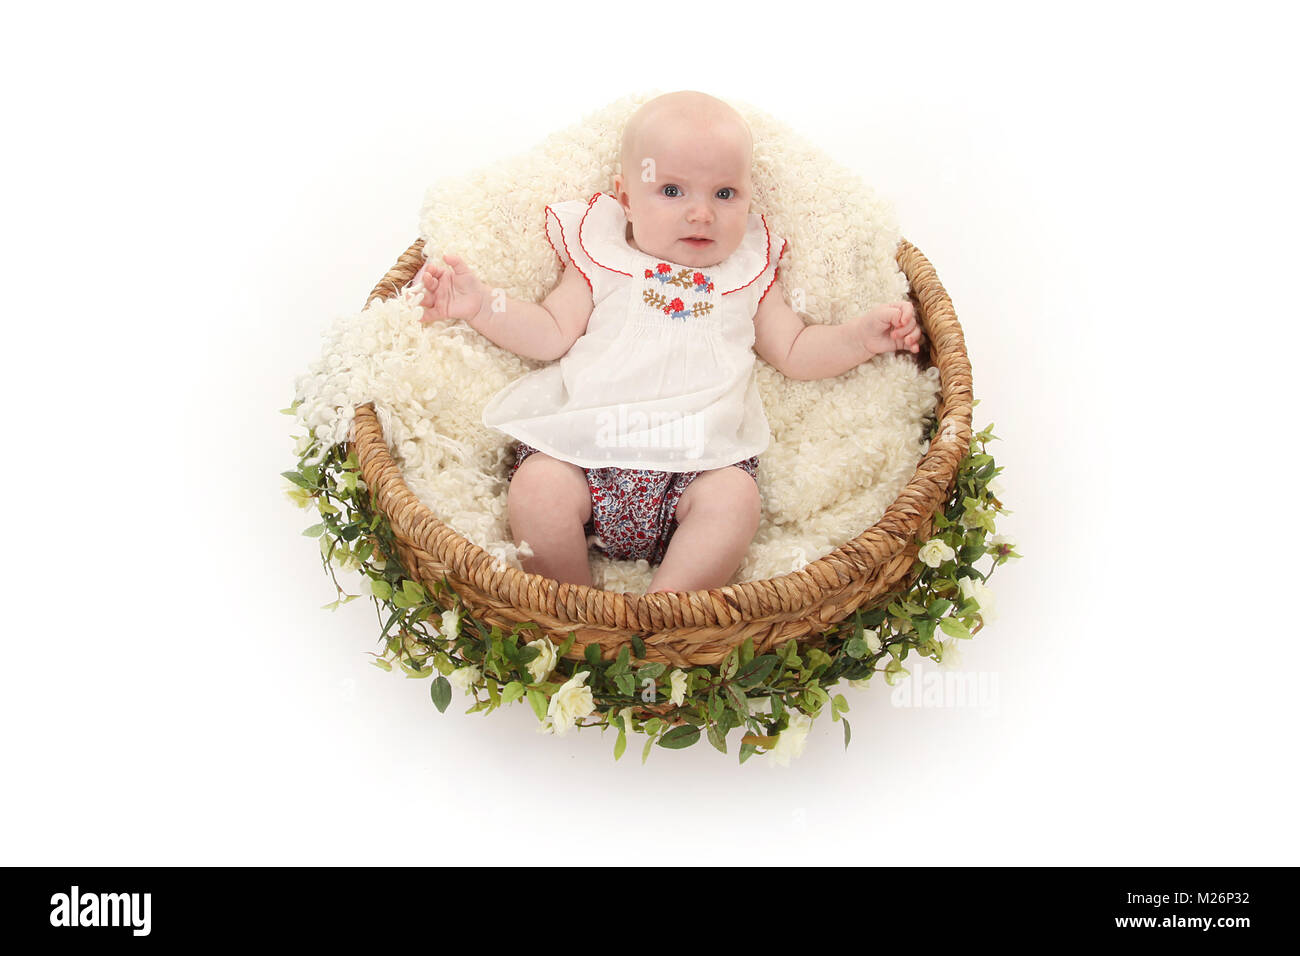 beautiful 3 month old baby girl happy playing in basket Stock Photo